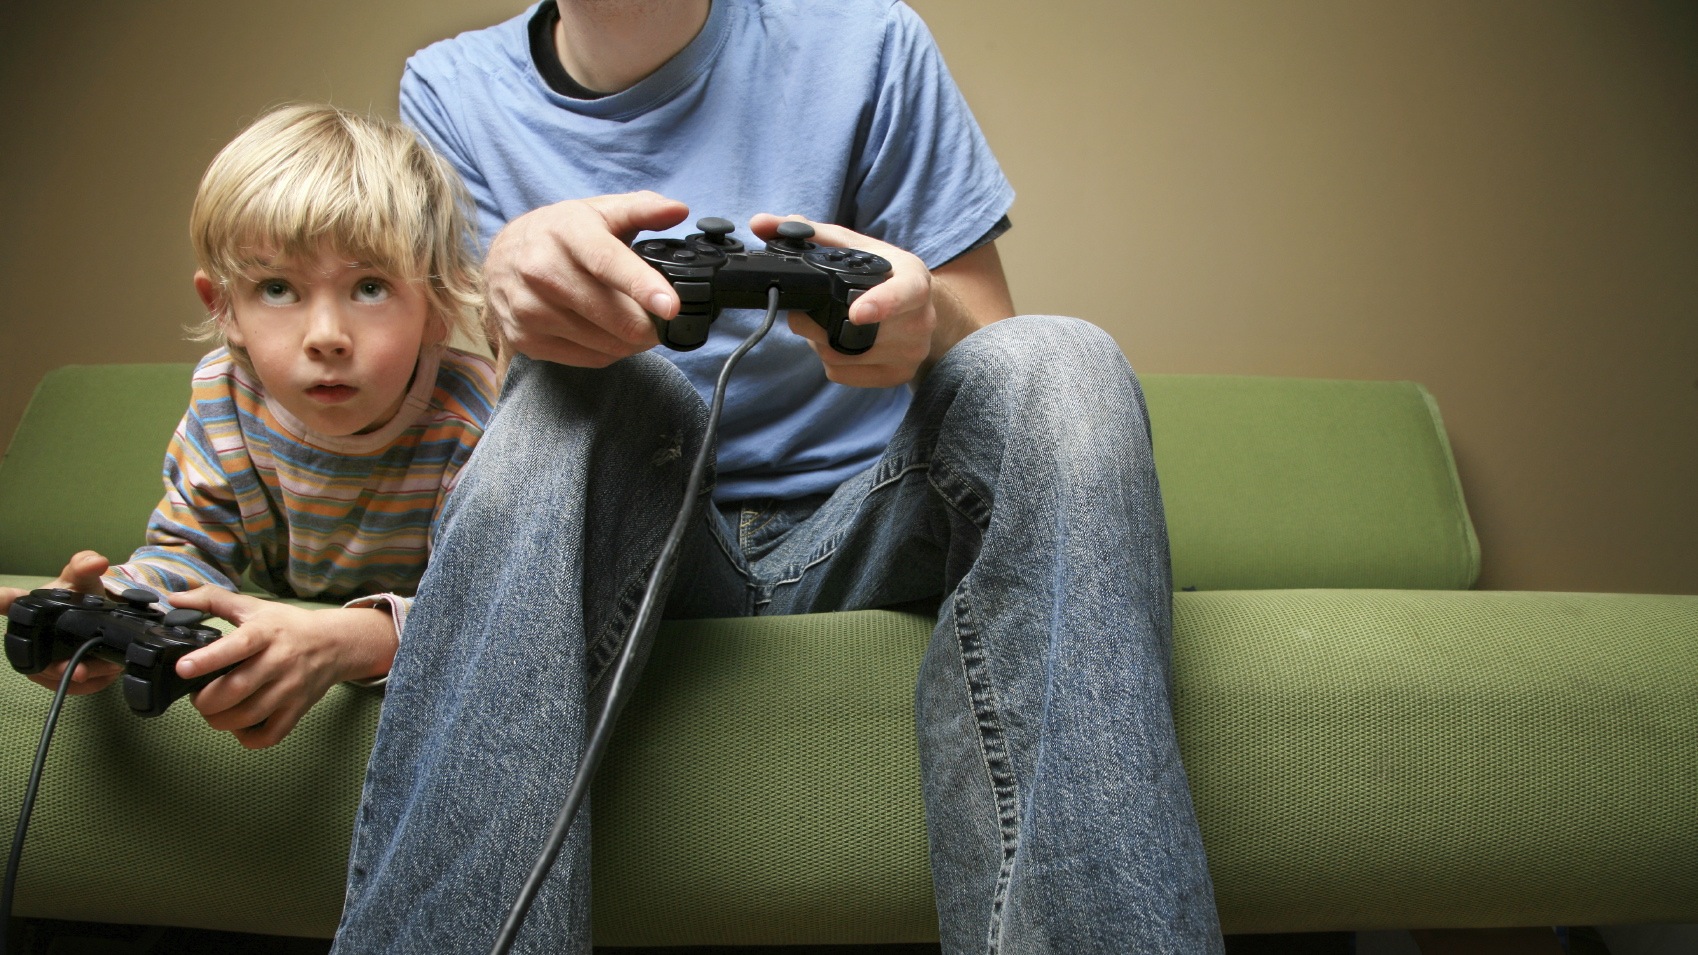 5 Video Games That your Kids Should Play